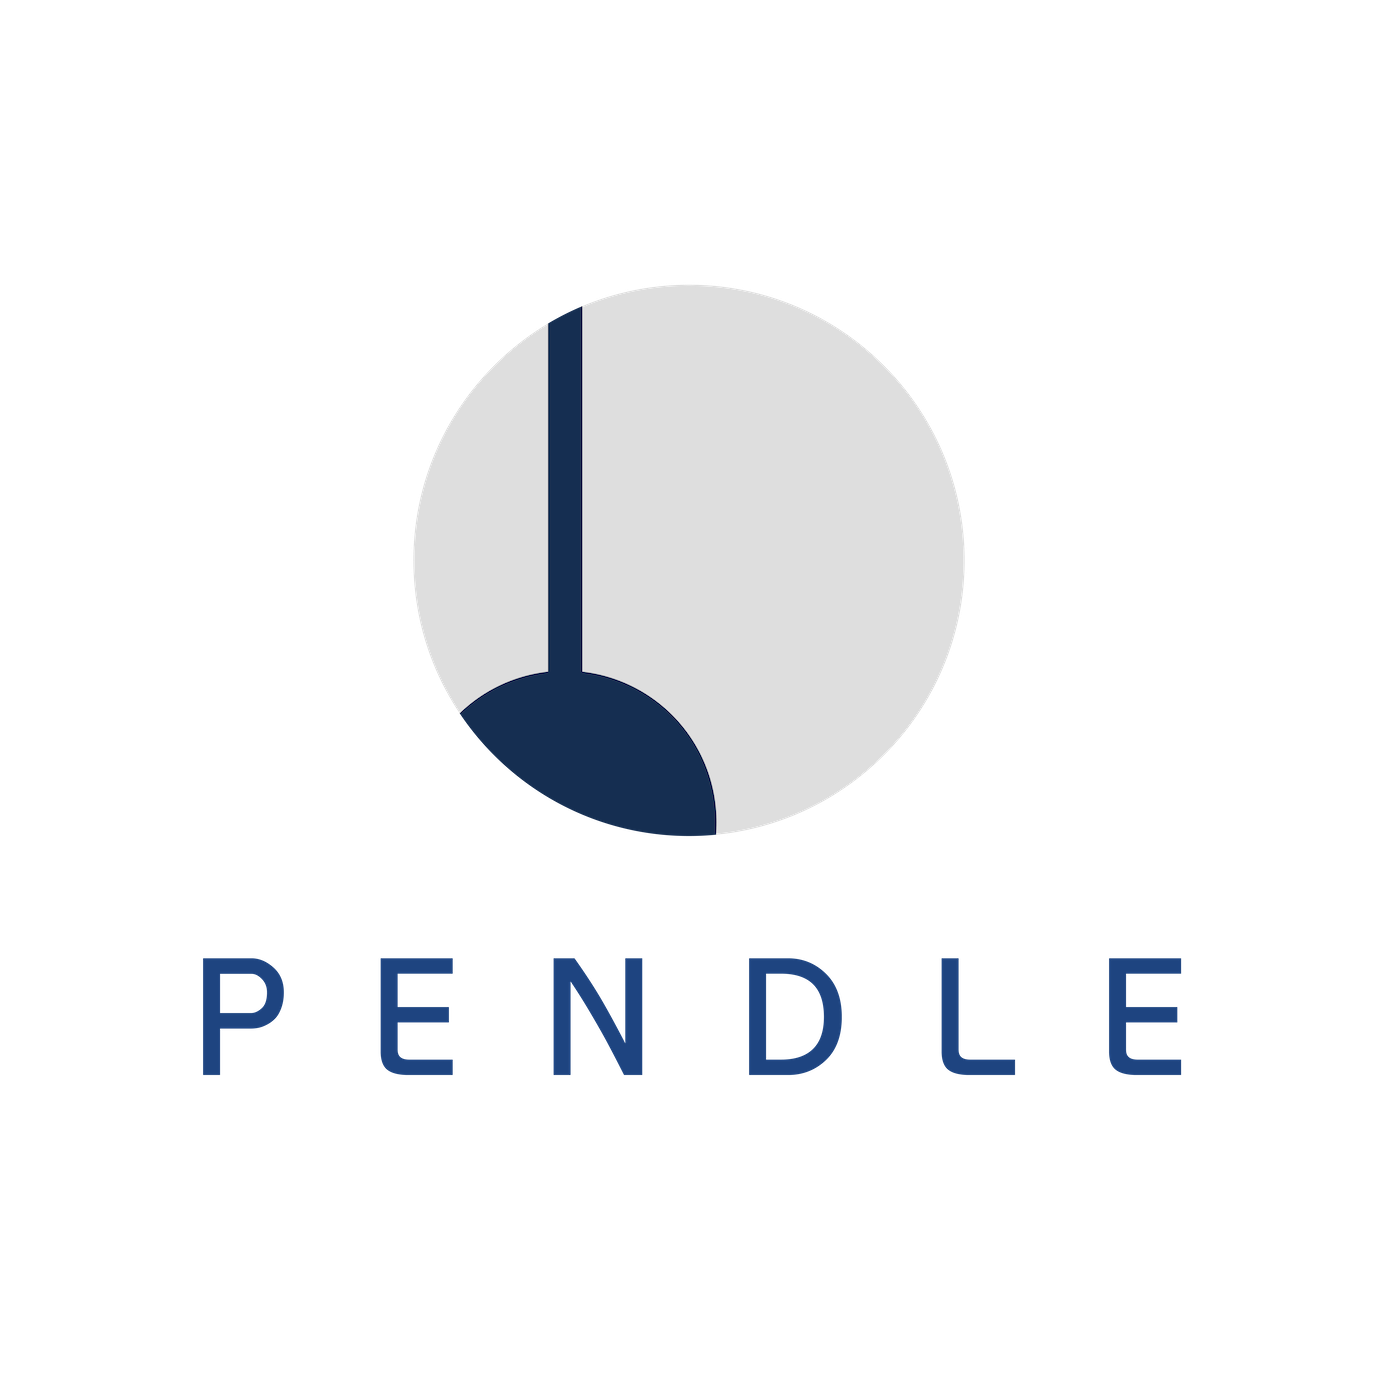 Cover Image for pendle